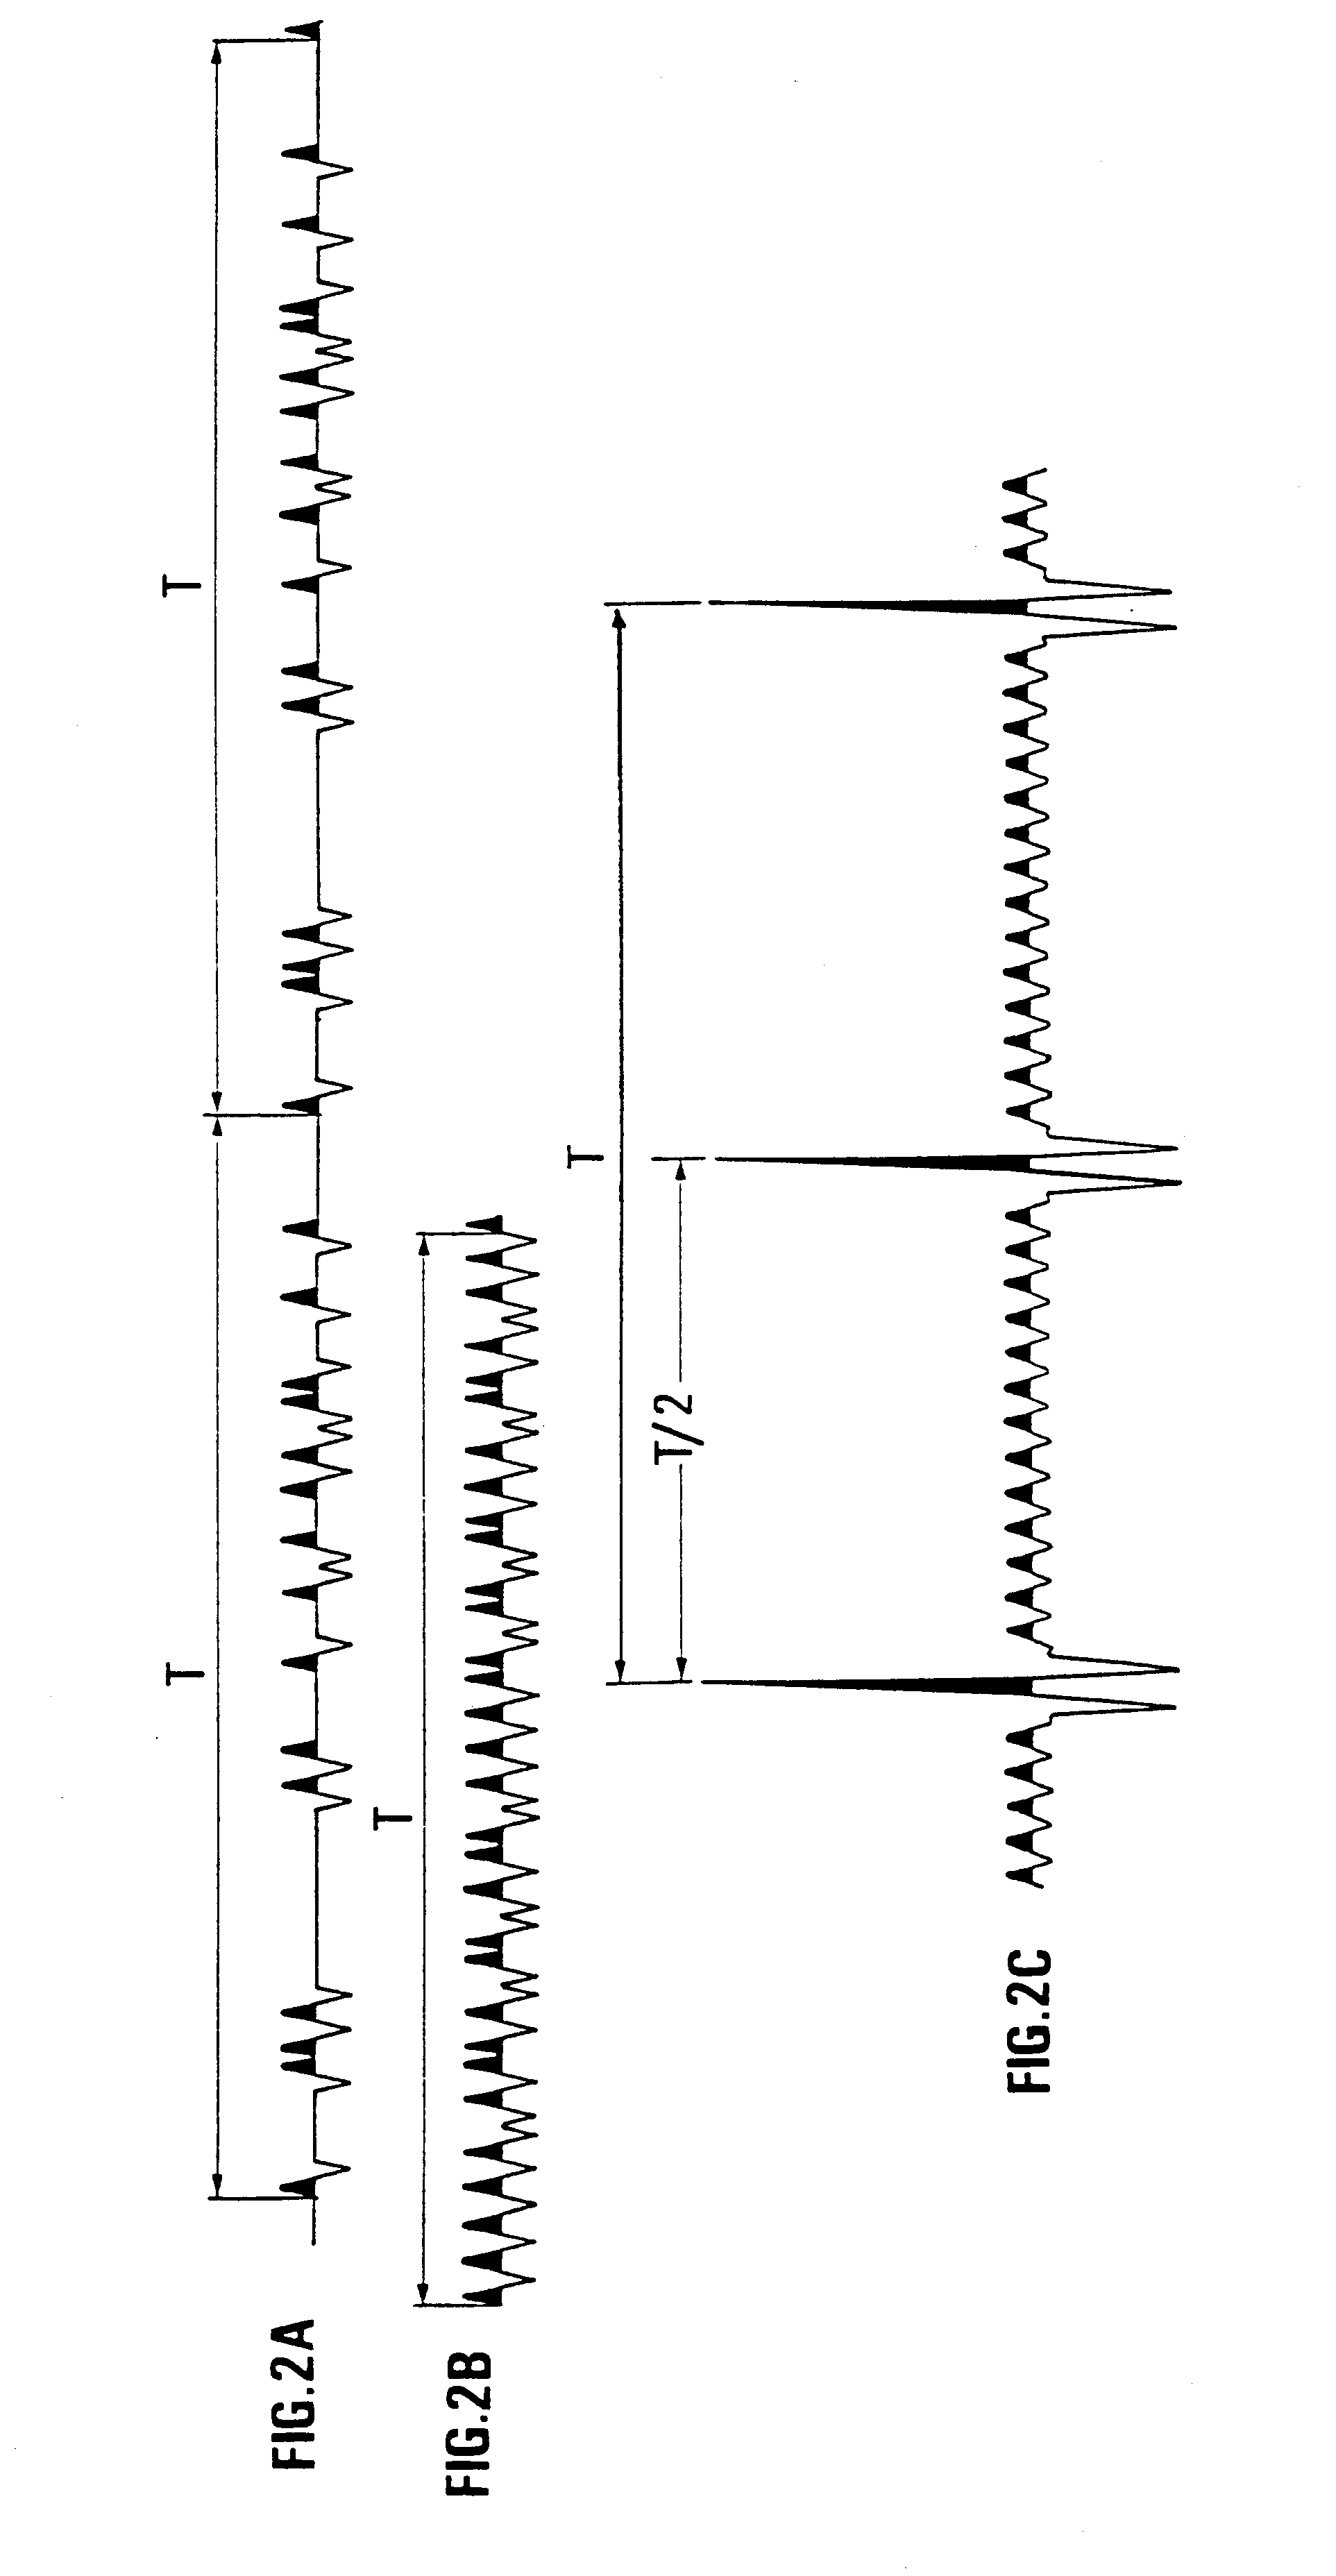 Seismic prospecting method and device using simultaneous emission of seismic signals obtained by coding a signal by pseudo-random sequences